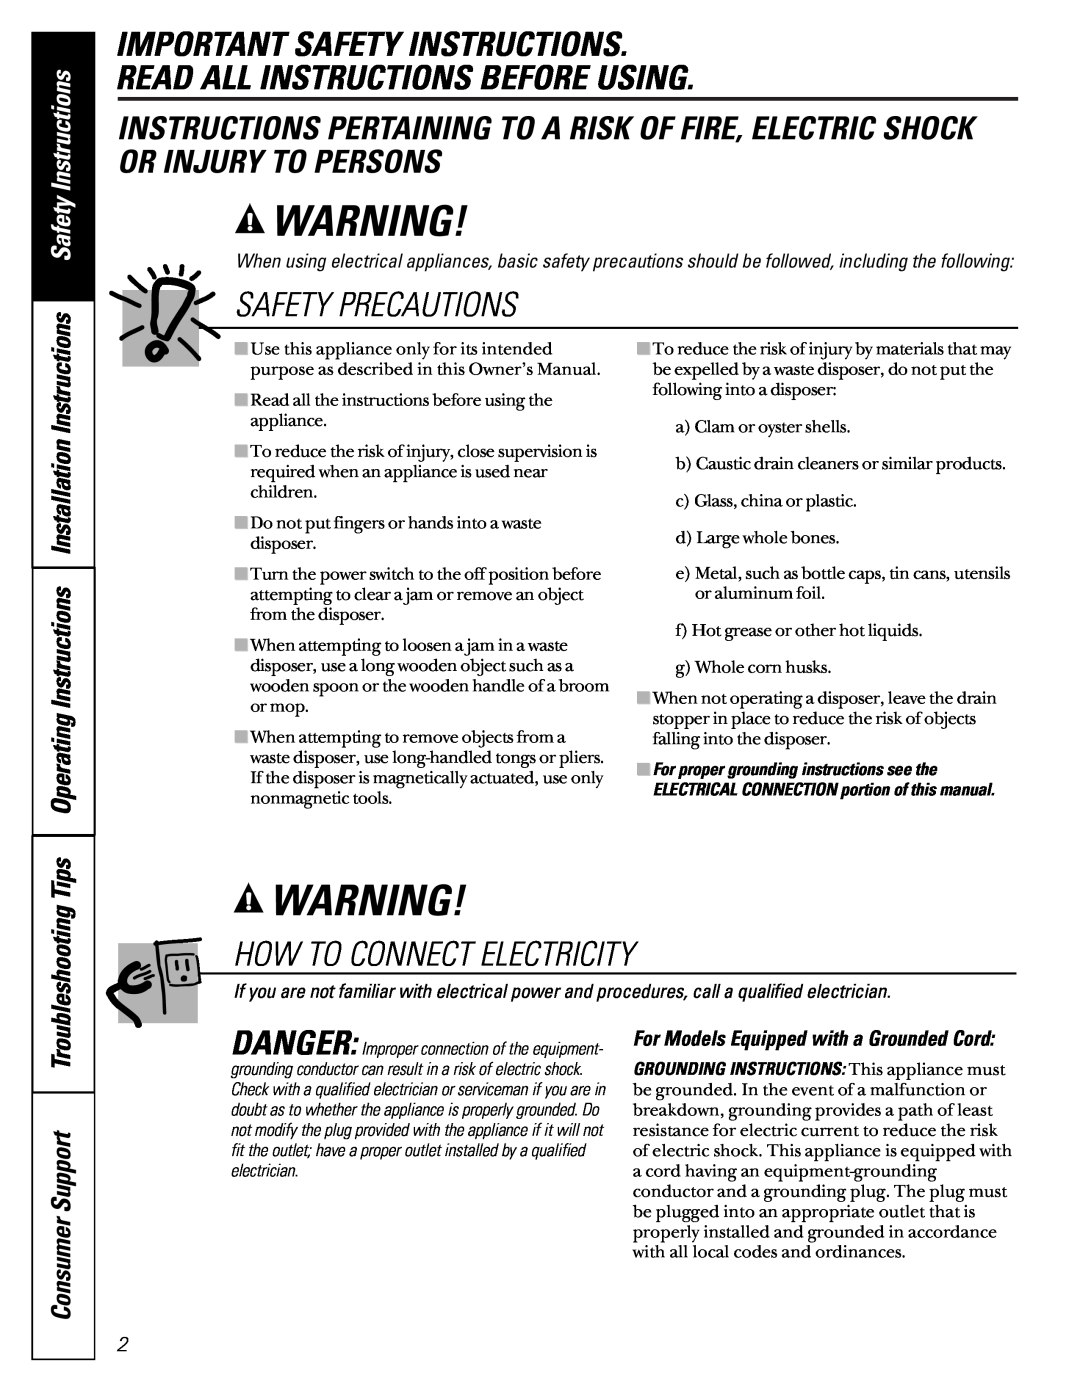 GE GFC300F Important Safety Instructions Read All Instructions Before Using, Safety Precautions, Consumer Support 